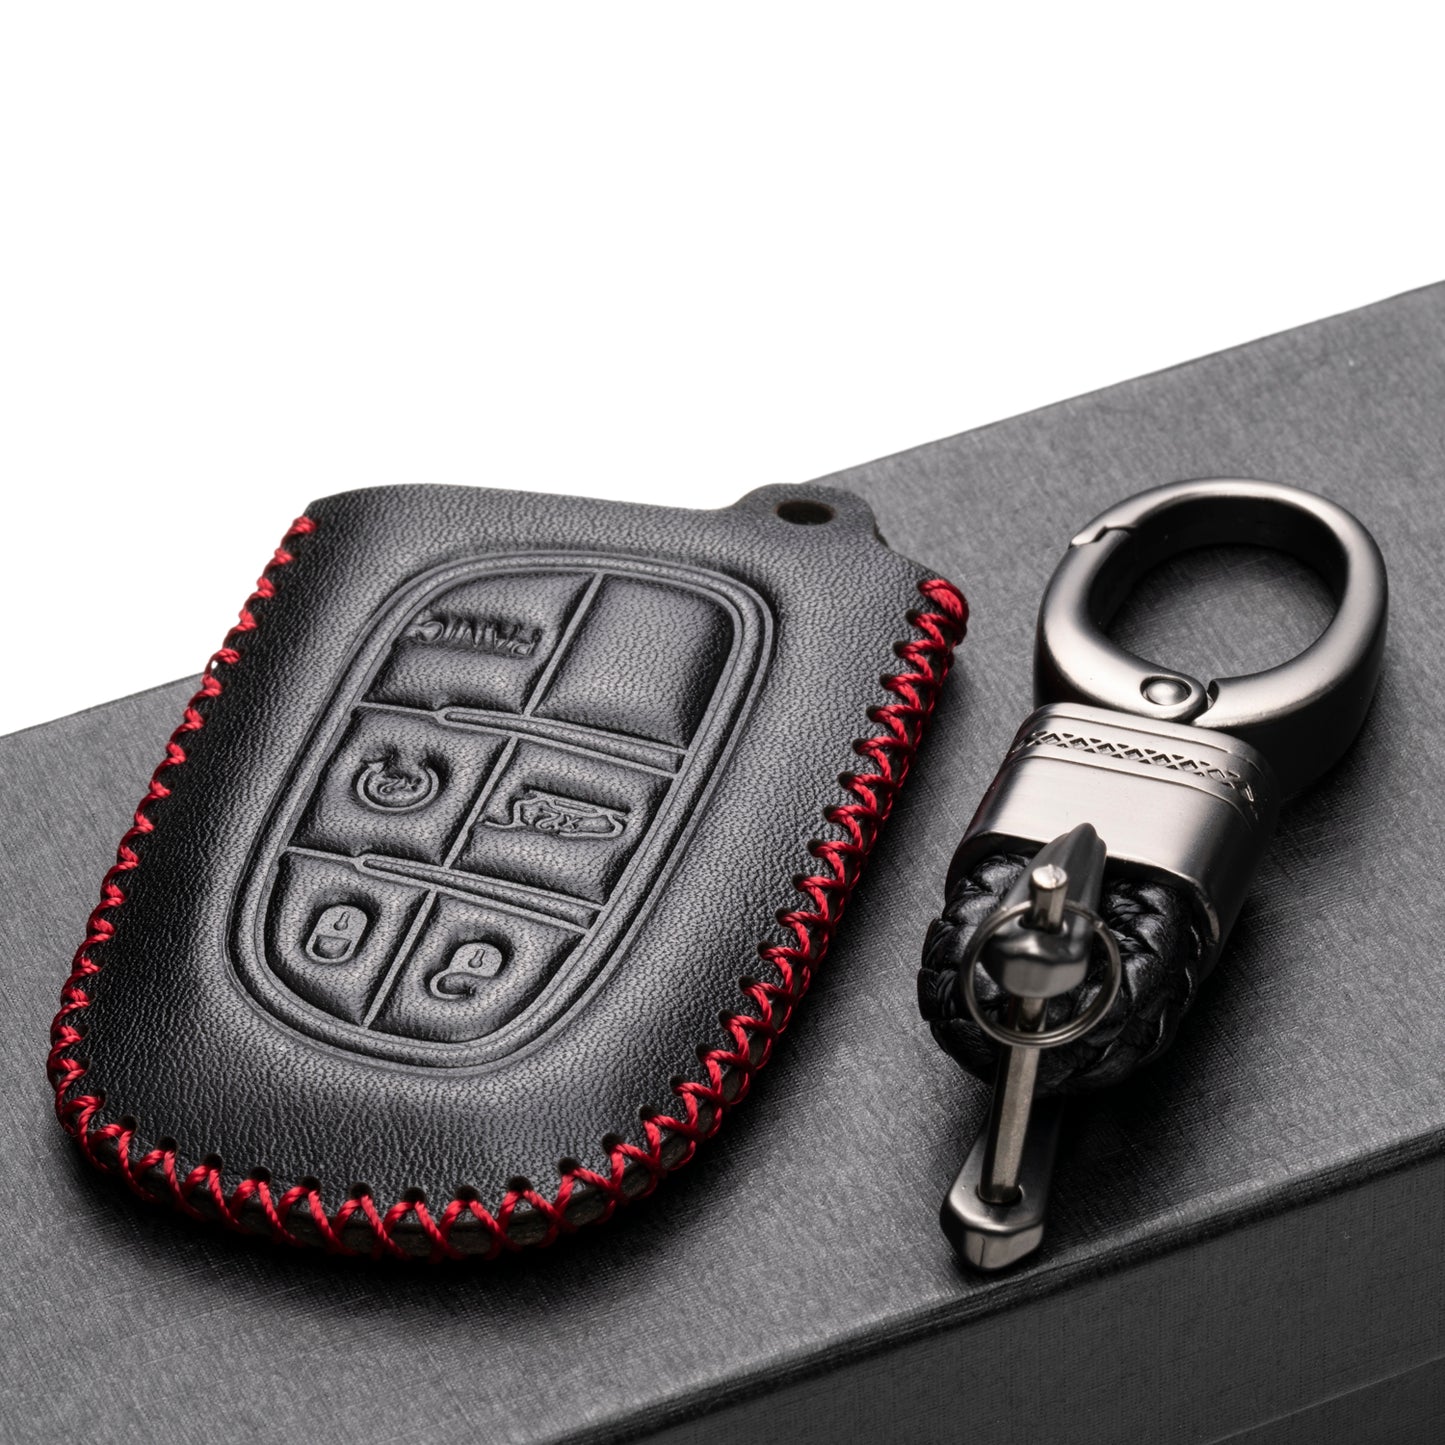 Vitodeco 5-Button Genuine Leather Smart Key Fob Case Cover Protector for 2014-2018 Jeep Cherokee, 2013-2017 Ram 1500, 2500, 3500